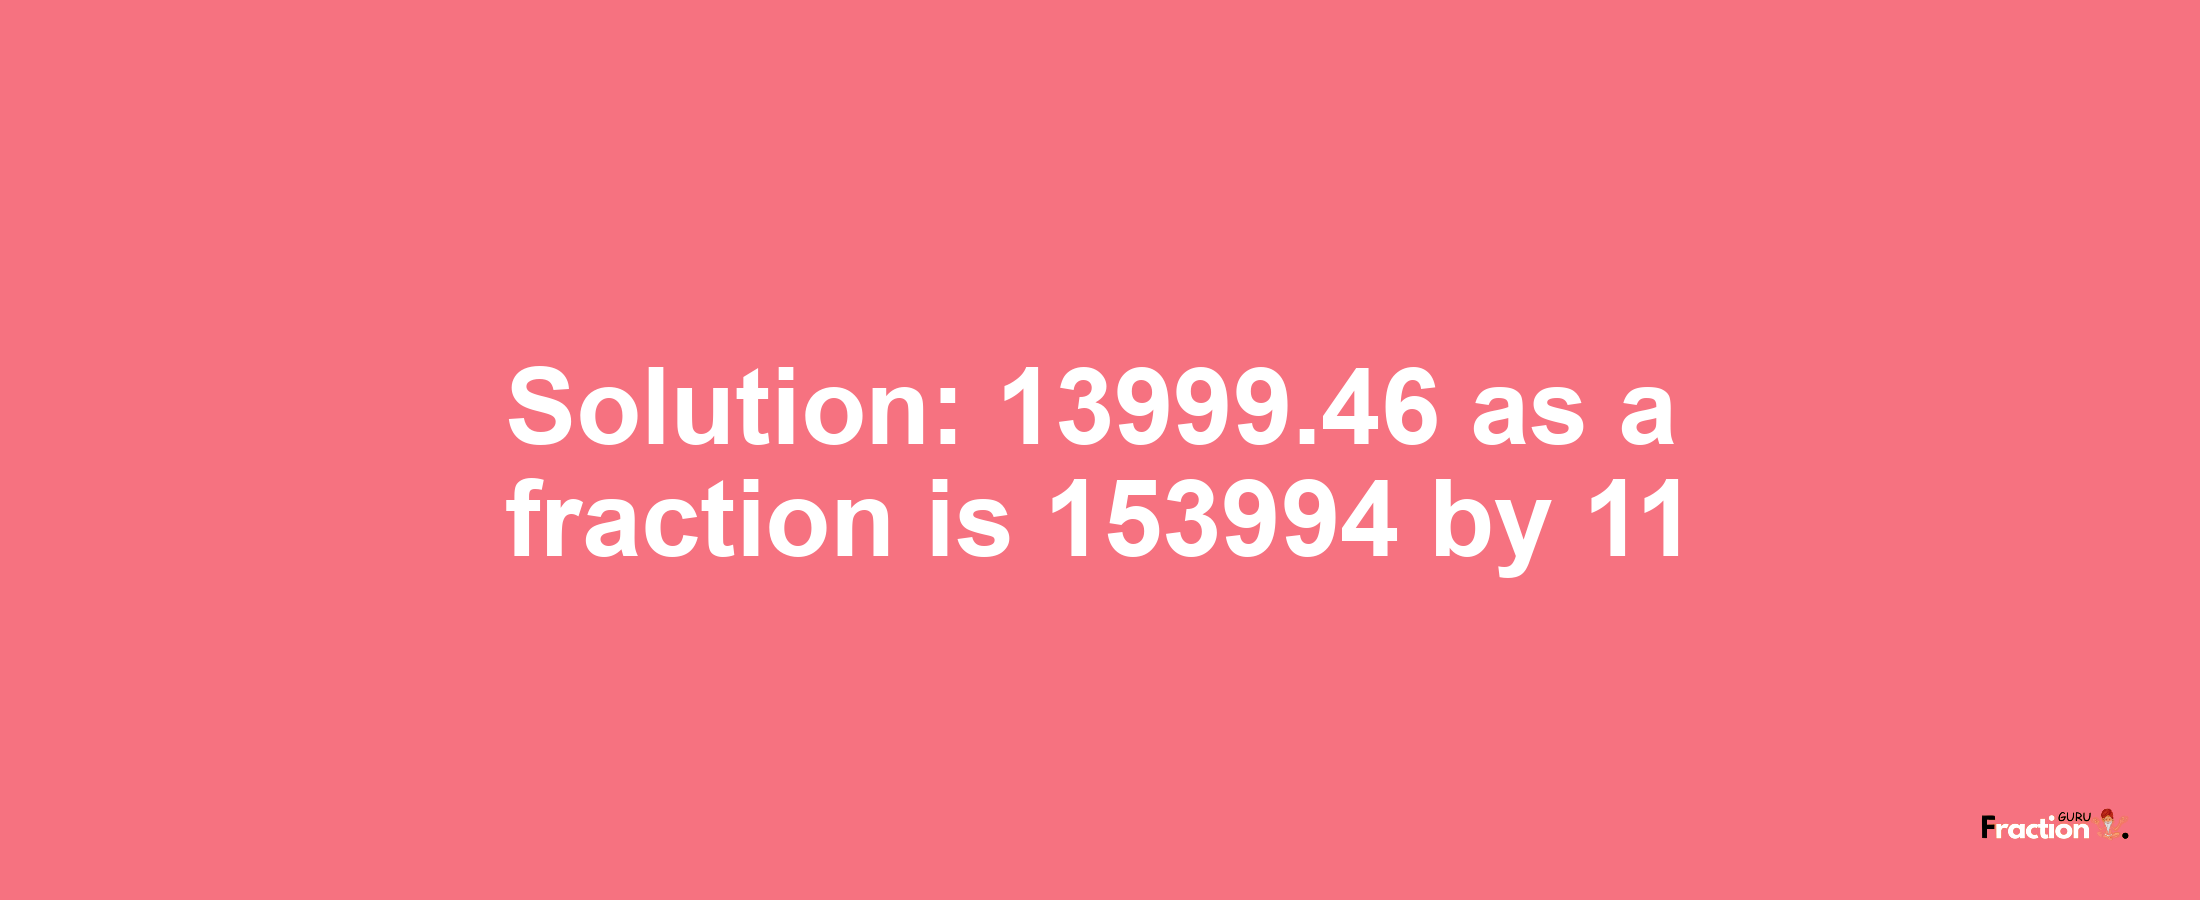 Solution:13999.46 as a fraction is 153994/11